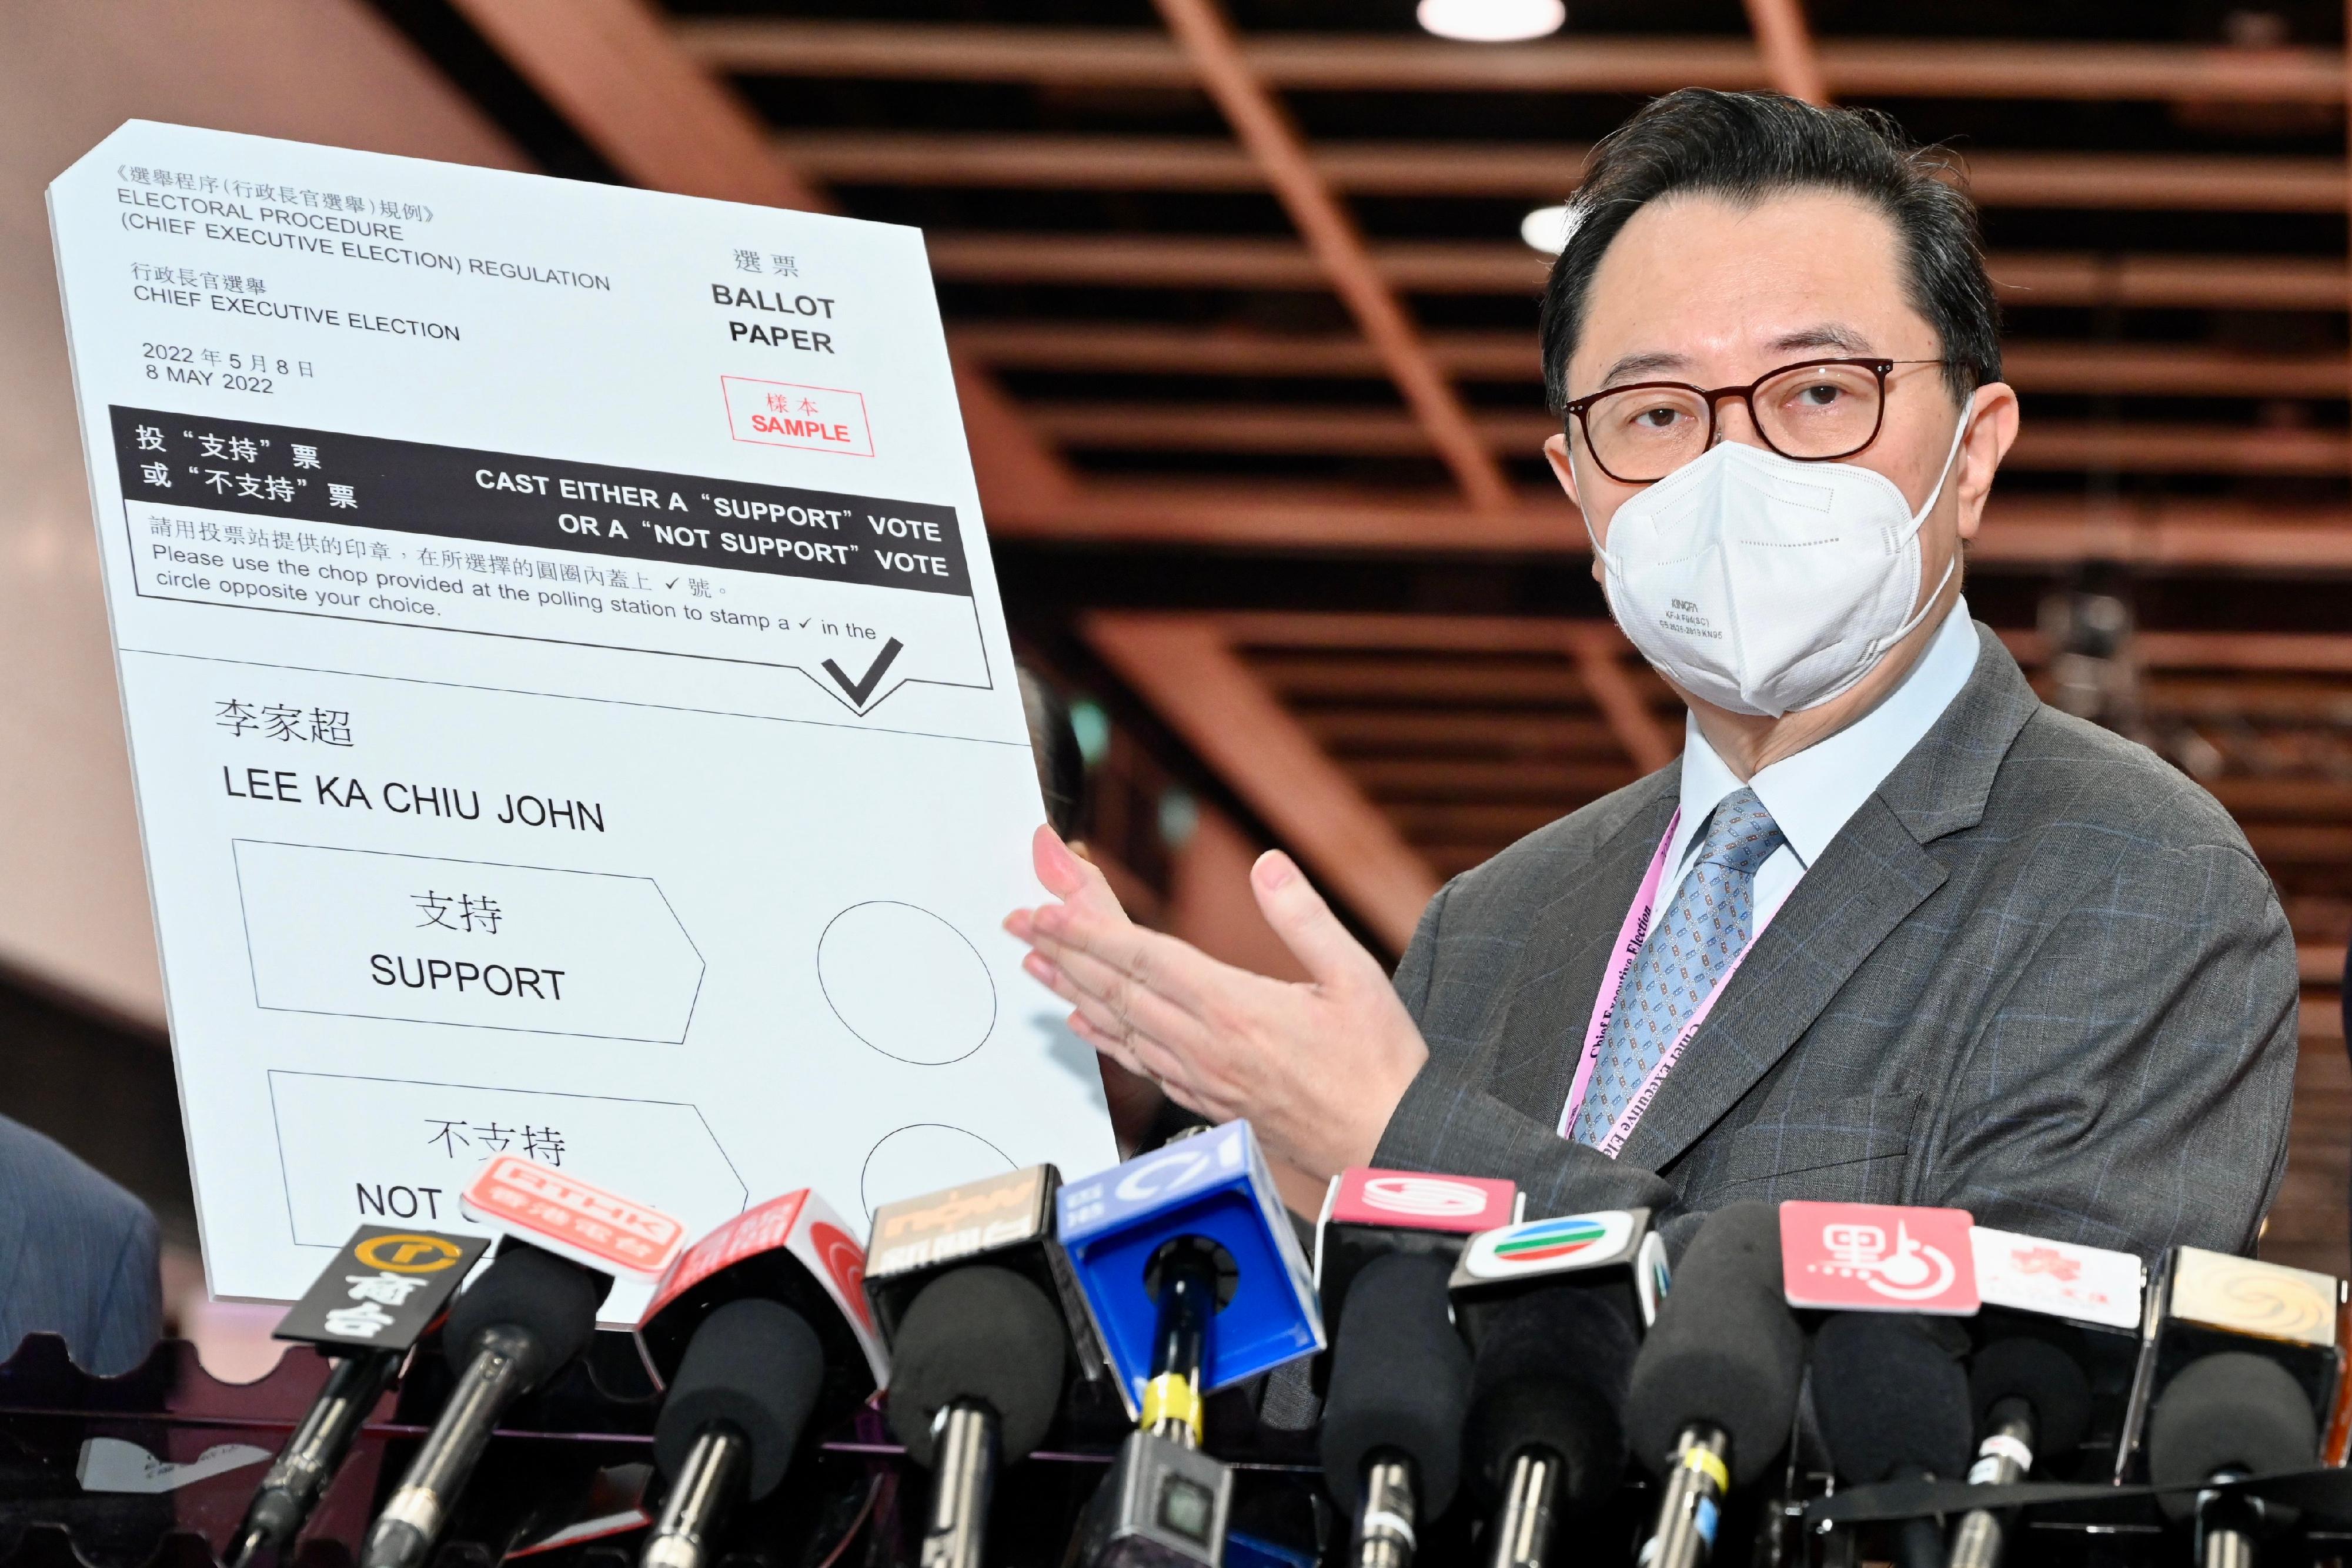 The Chairman of the Electoral Affairs Commission, Mr Justice Barnabas Fung Wah, met the media today (May 7) after visiting the main polling station of the 2022 Chief Executive Election at the Hong Kong Convention and Exhibition Centre in Wan Chai. Photo shows Mr Justice Fung showing a sample ballot paper to the media.